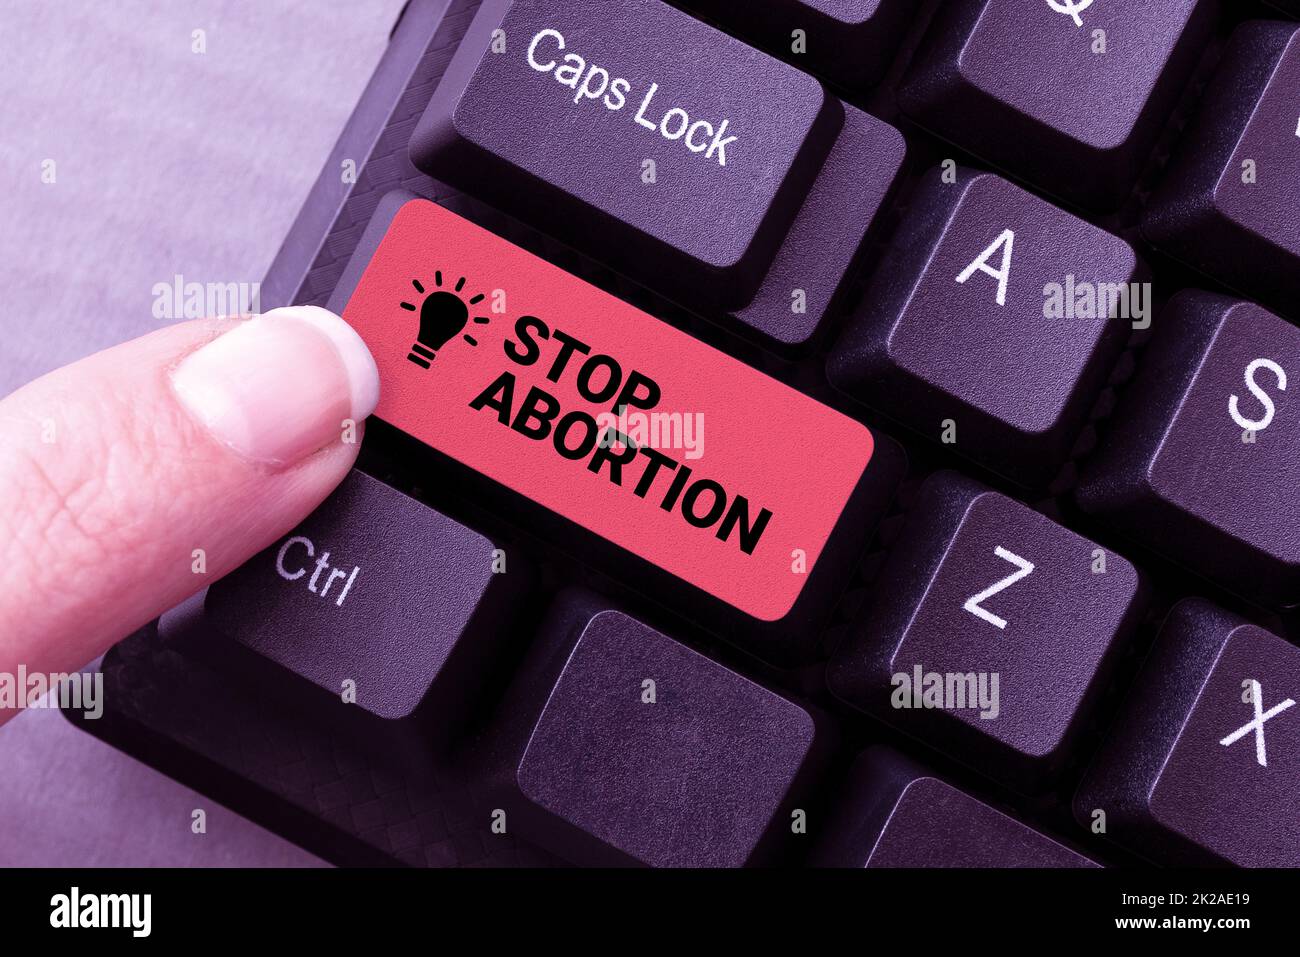 Writing displaying text Stop Abortion. Business approach advocating against the practice of abortion Prolife movement Downloading Online Files And Data, Uploading Programming Codes Stock Photo